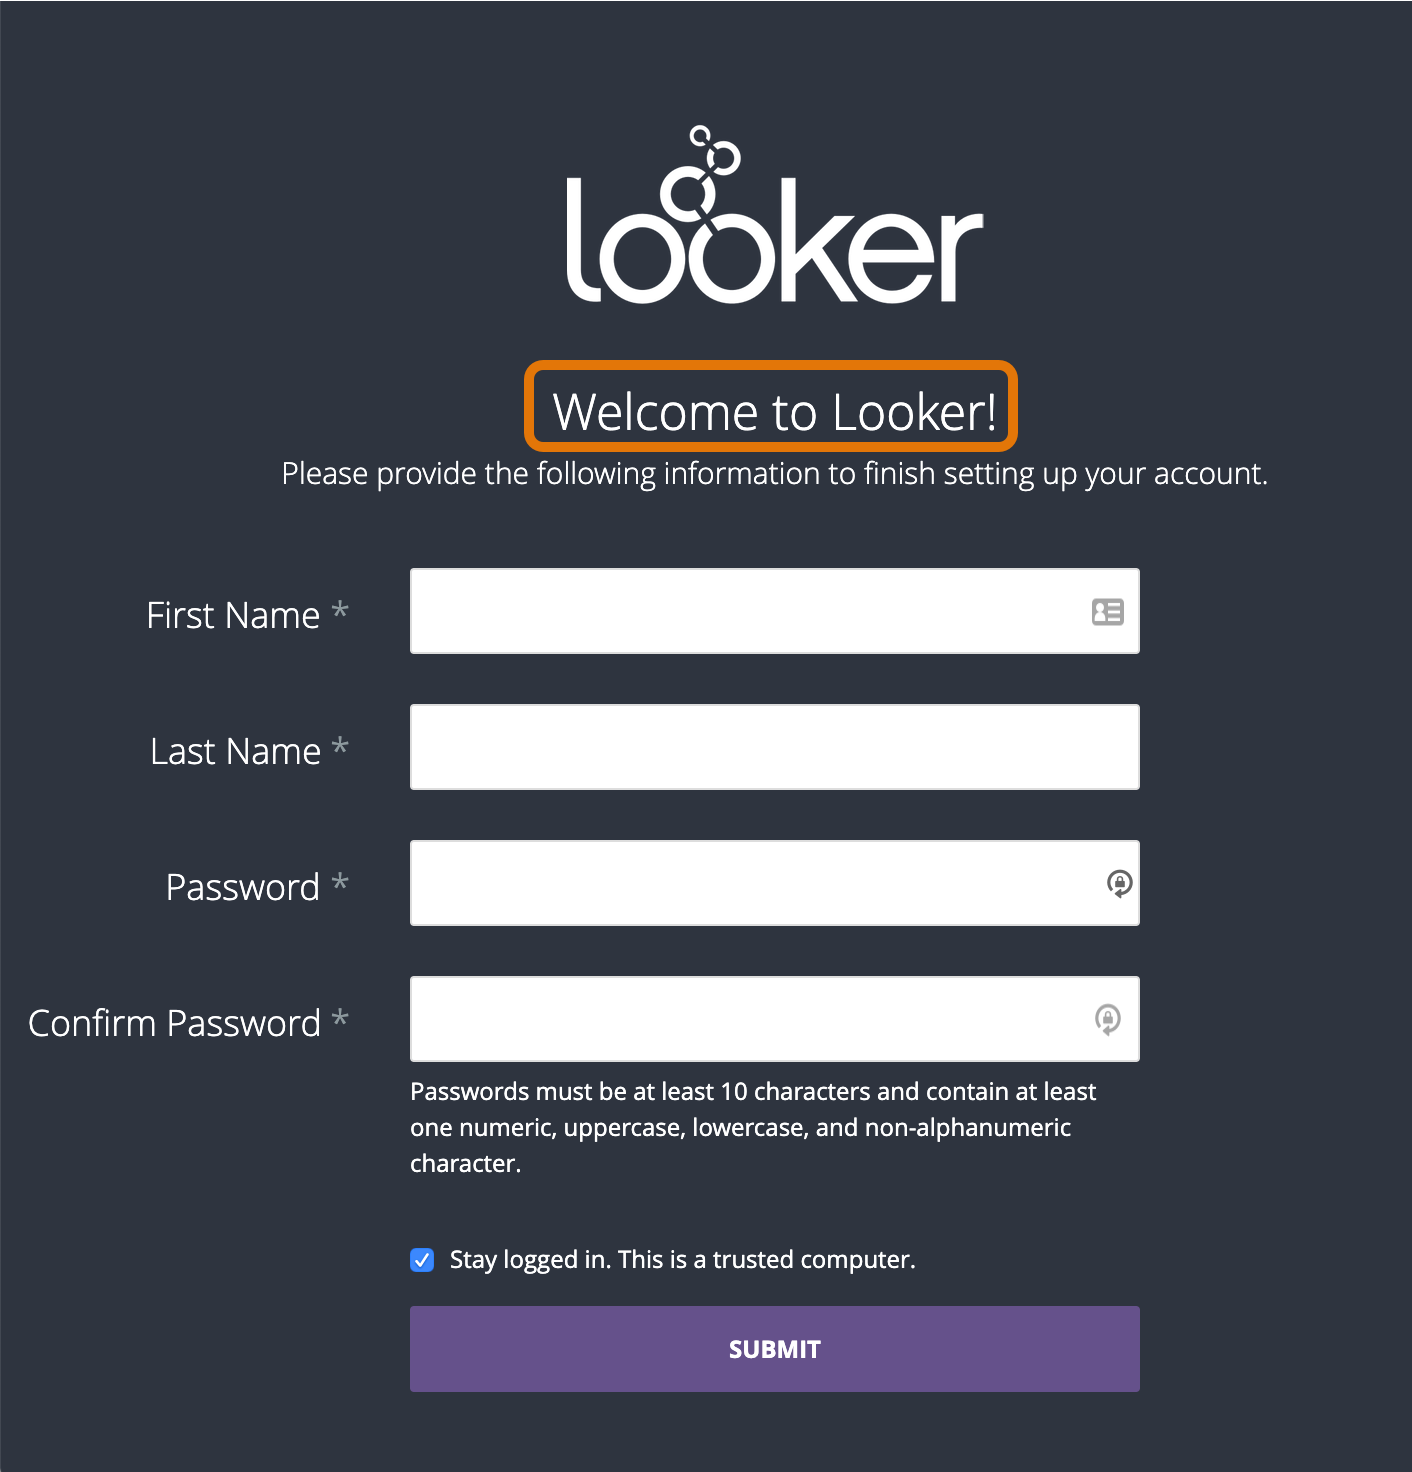 A screenshot of the Looker account setup page. There is a Looker logo at the top of the page, followed by the text Welcome to Looker!.